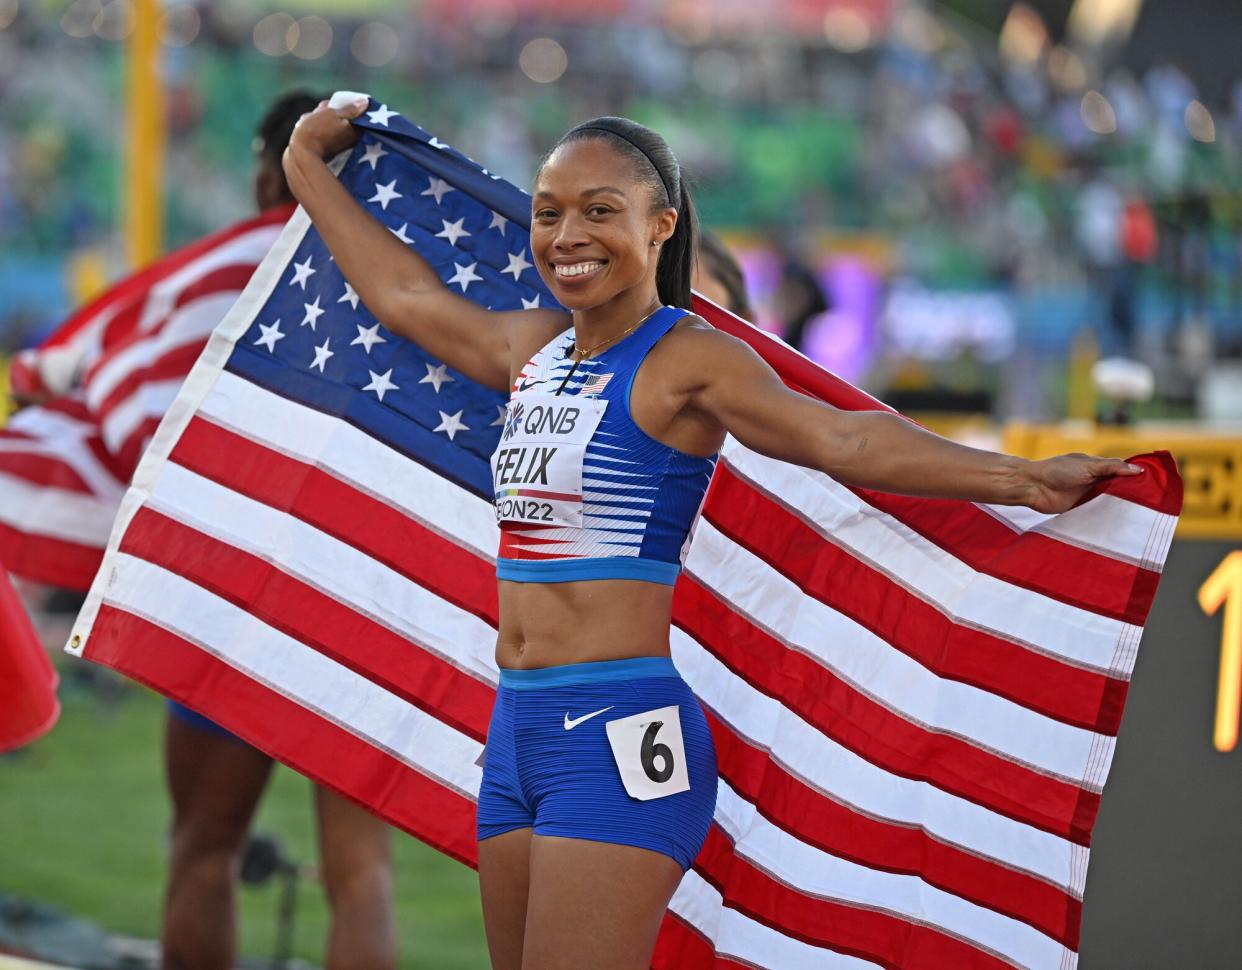 Allyson Felix of Team United States smiles after winning bronze in the 4x400m Mixed Relay Final during the eighteenth edition of the World Athletics Championships in Eugene, Oregon, United States on July 15, 2022.